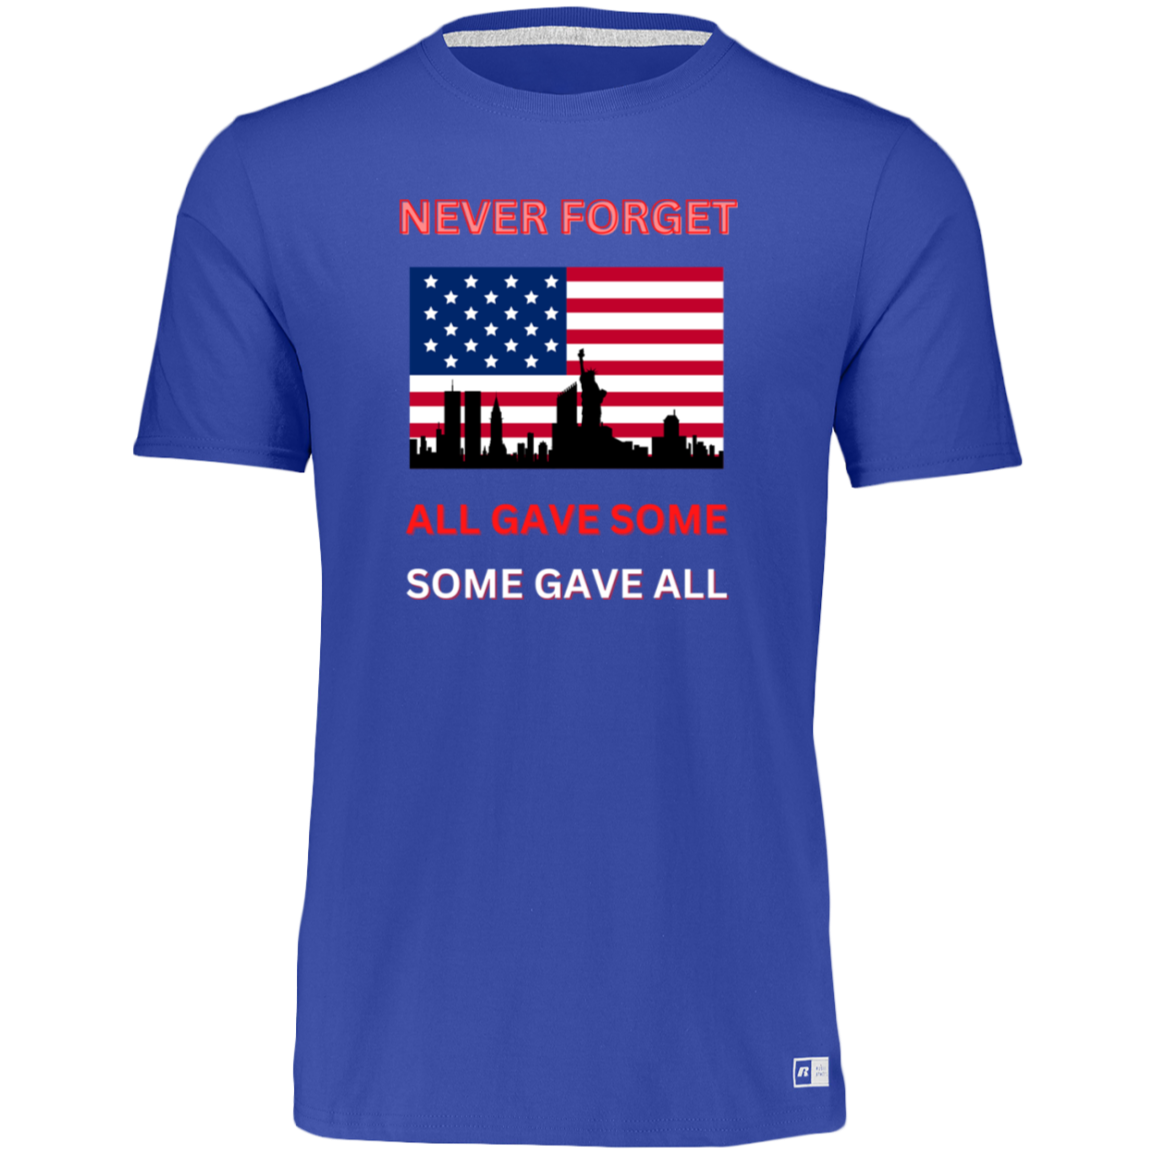 Unisex Dri-Power Tee--Never Forget All Gave Some